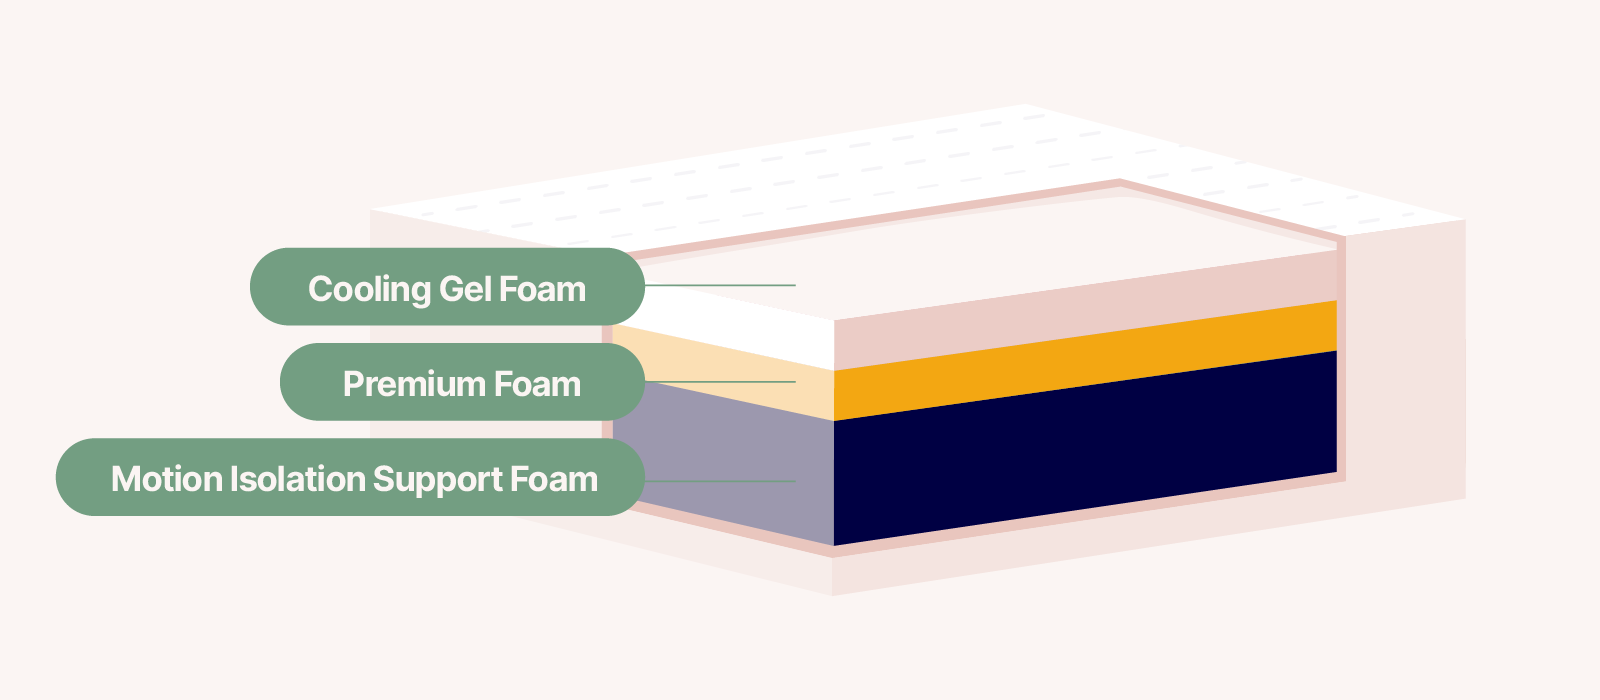 illustration of the inner components of a foam mattress based on the Douglas Original composition three layers within the mattress are shown text indicates that the top layer of the mattress is cooling gel foam the middle layer is premium foam and the base layer is motion isolation support foam